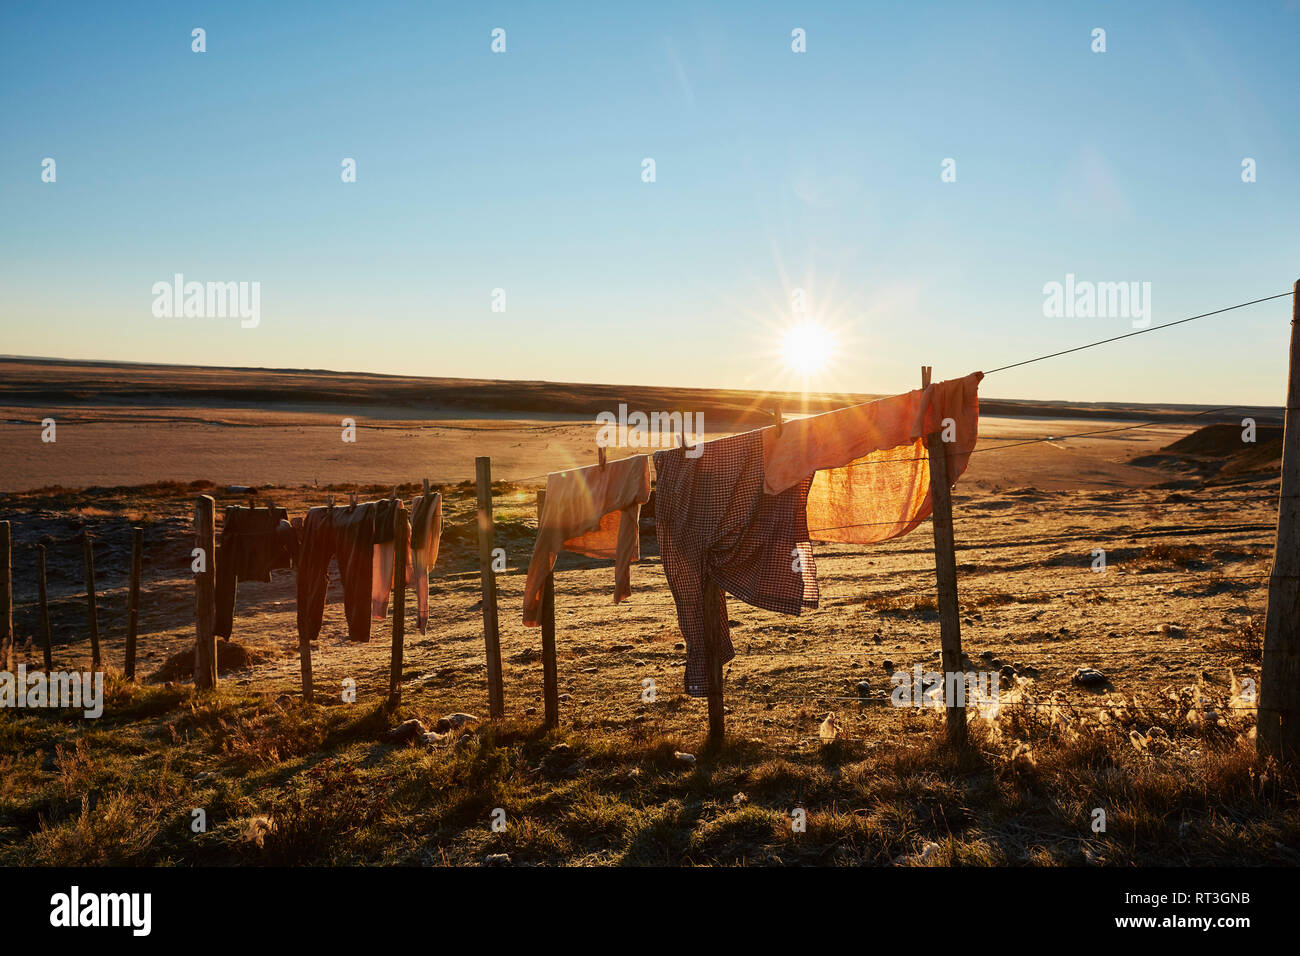 Chile, Tierra del Fuego, clothes hanging out to dry on a clothesline of an Estancia Stock Photo